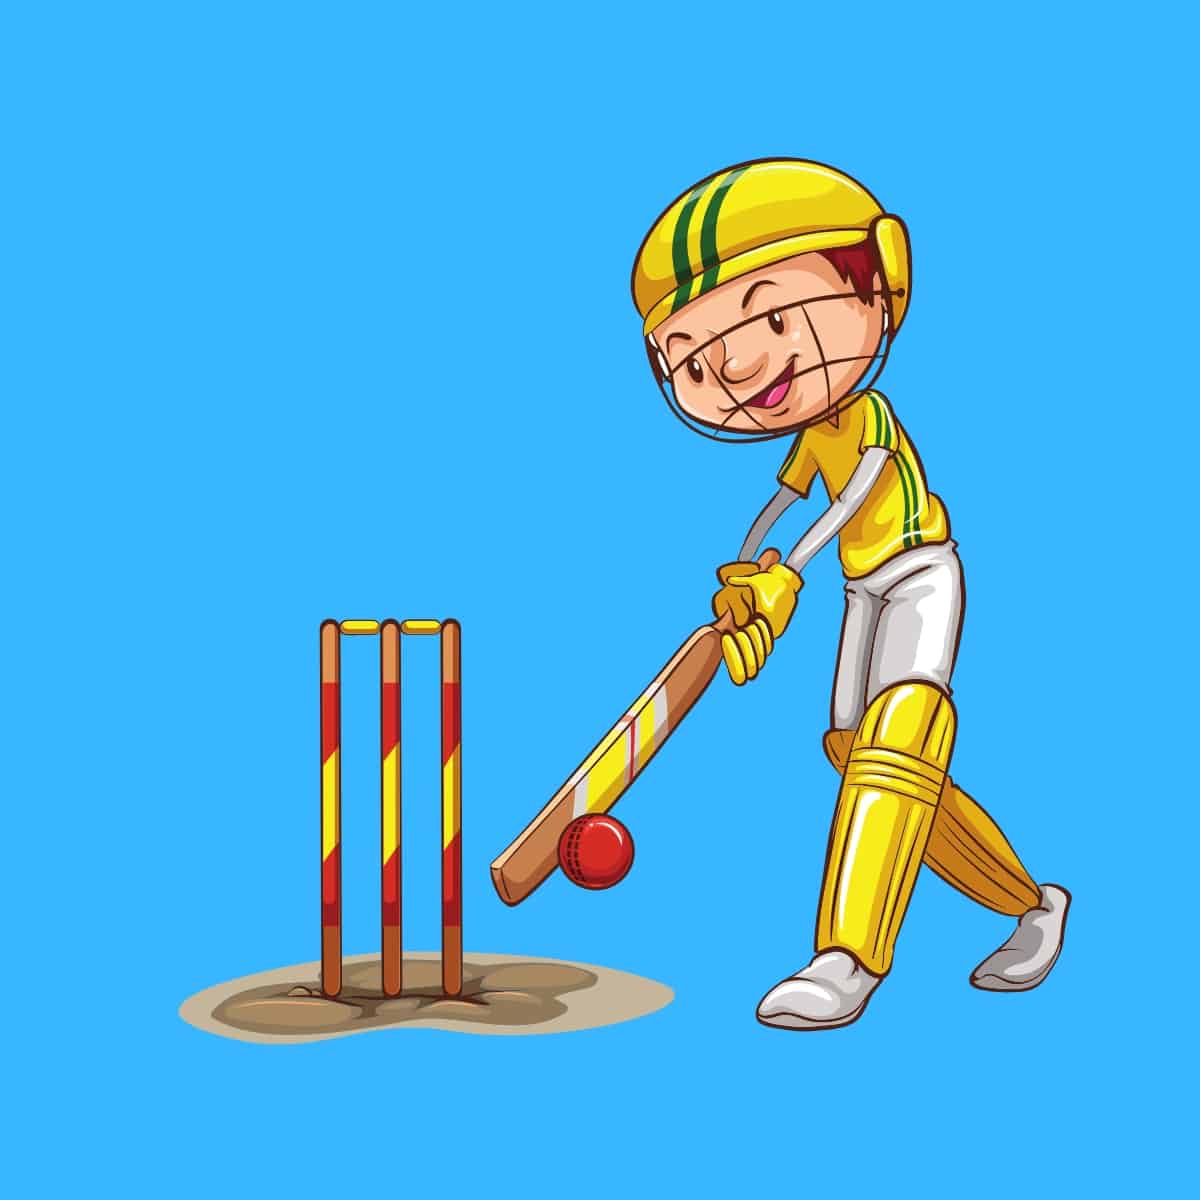 Cartoon graphic of an Australian cricket batsman hitting a cricket ball by the wickets on blue background.